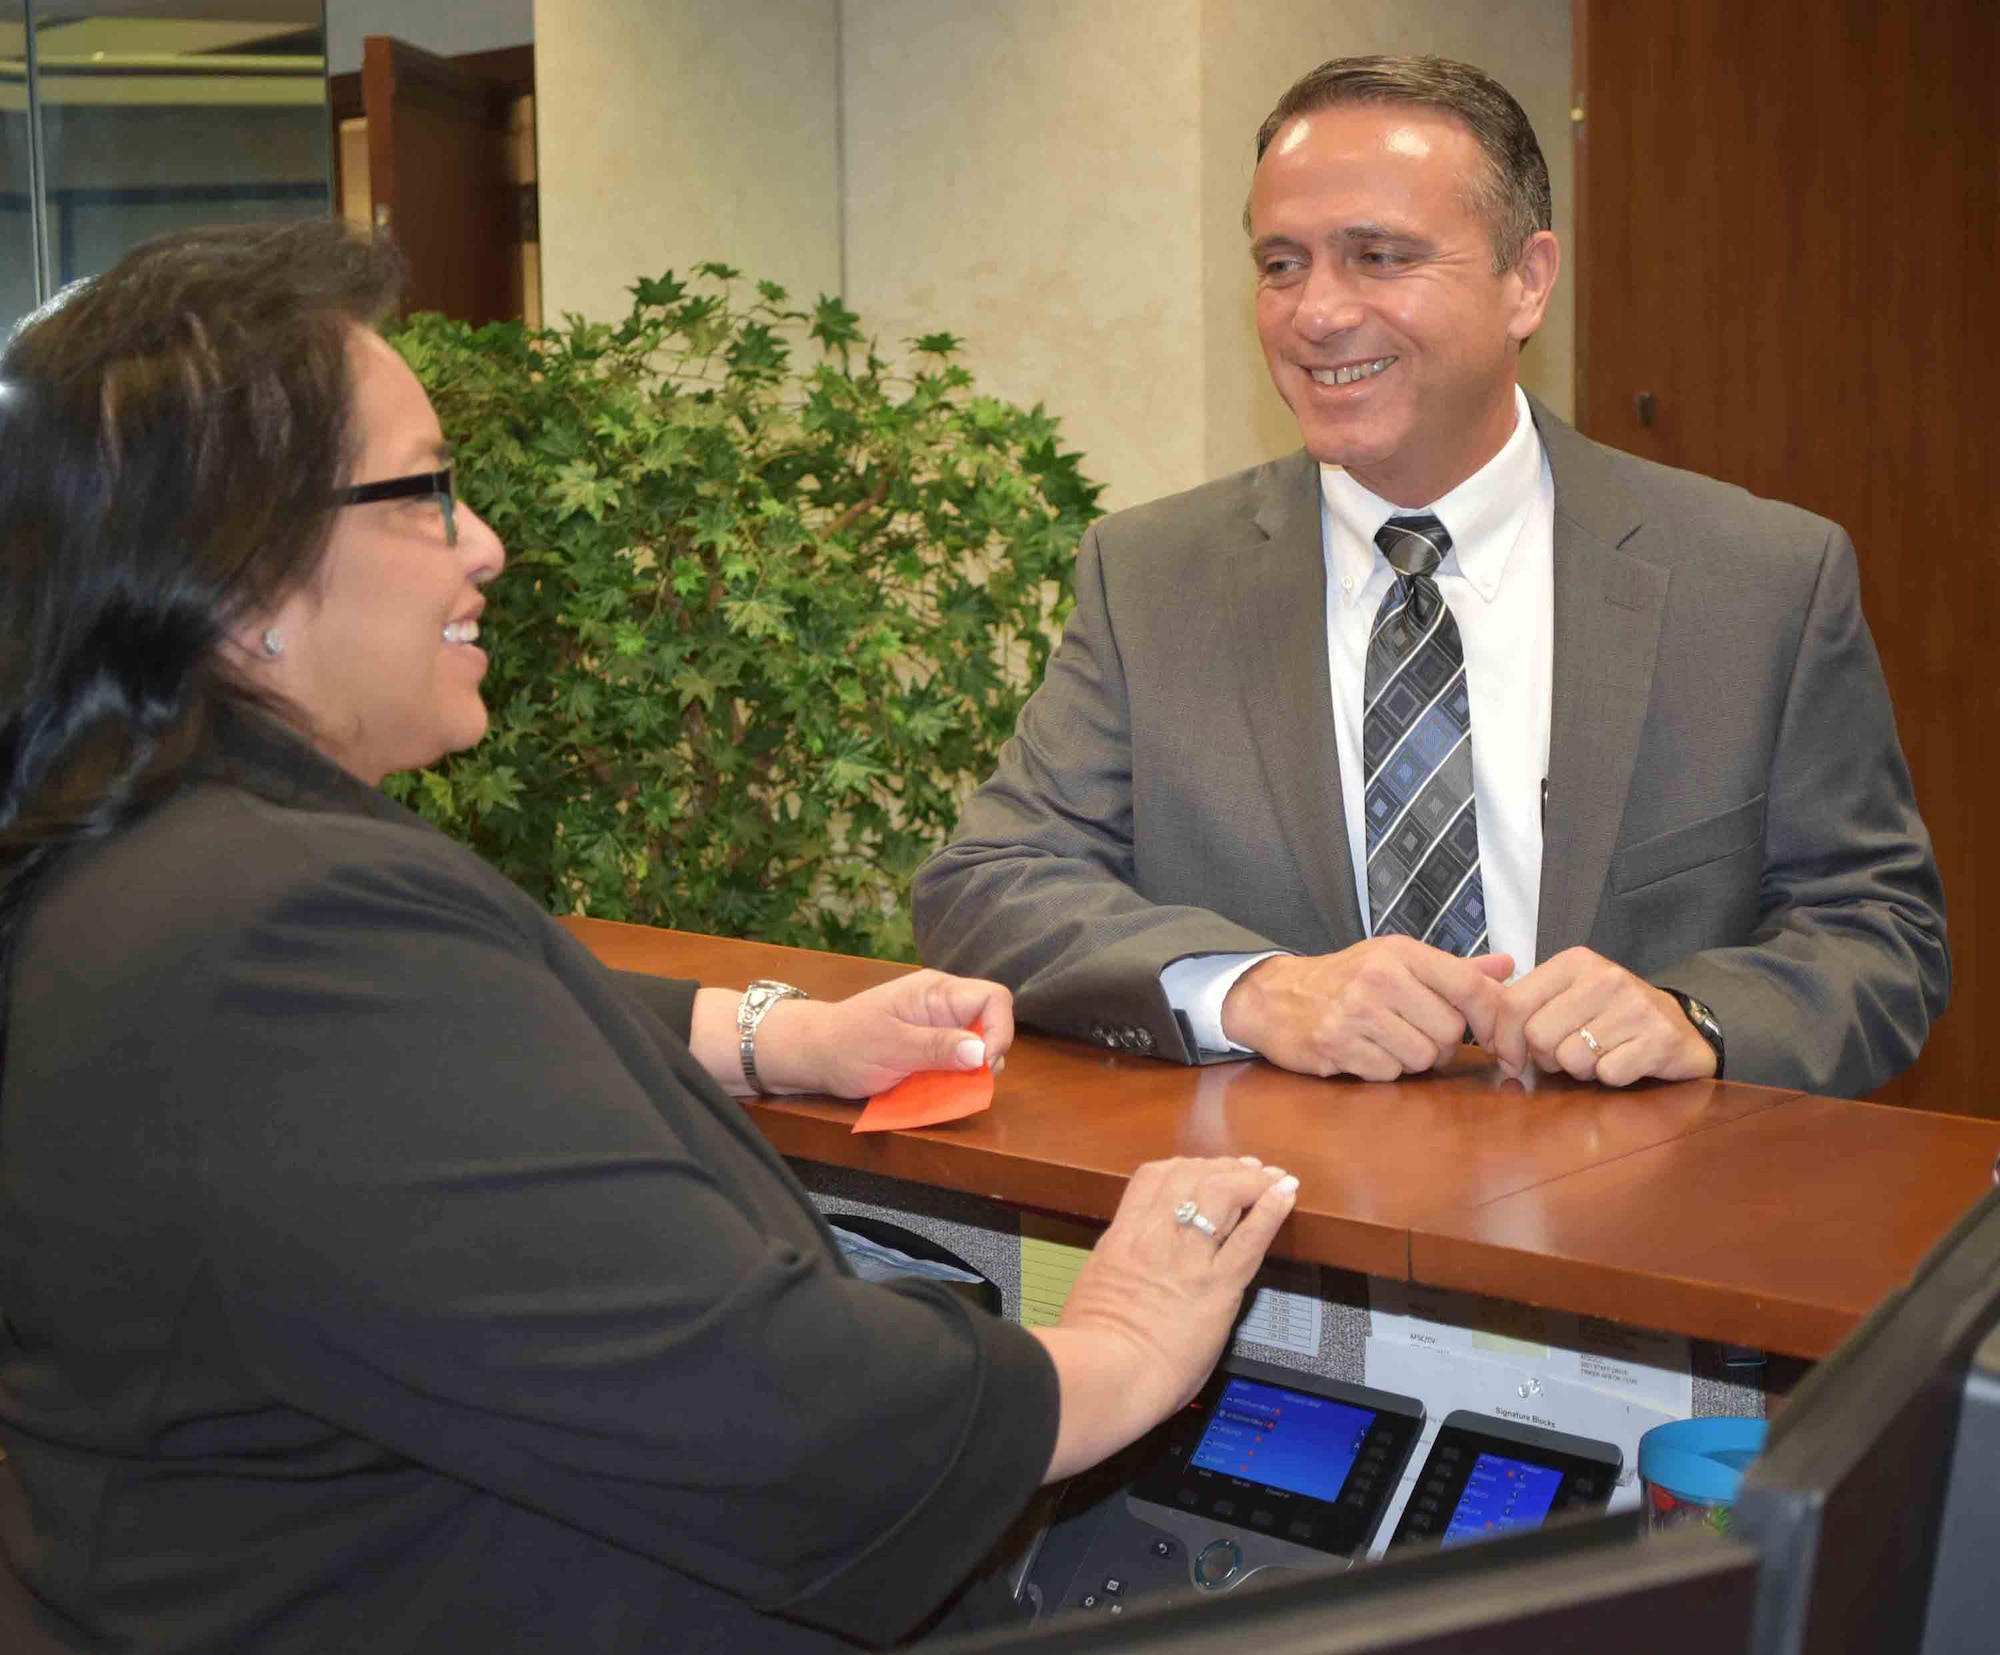 Kevin Stamey, Air Force Sustainment Center executive director, visits with his administrative assistant, Audrey Tilley, outside his new office in Bldg. 3001.